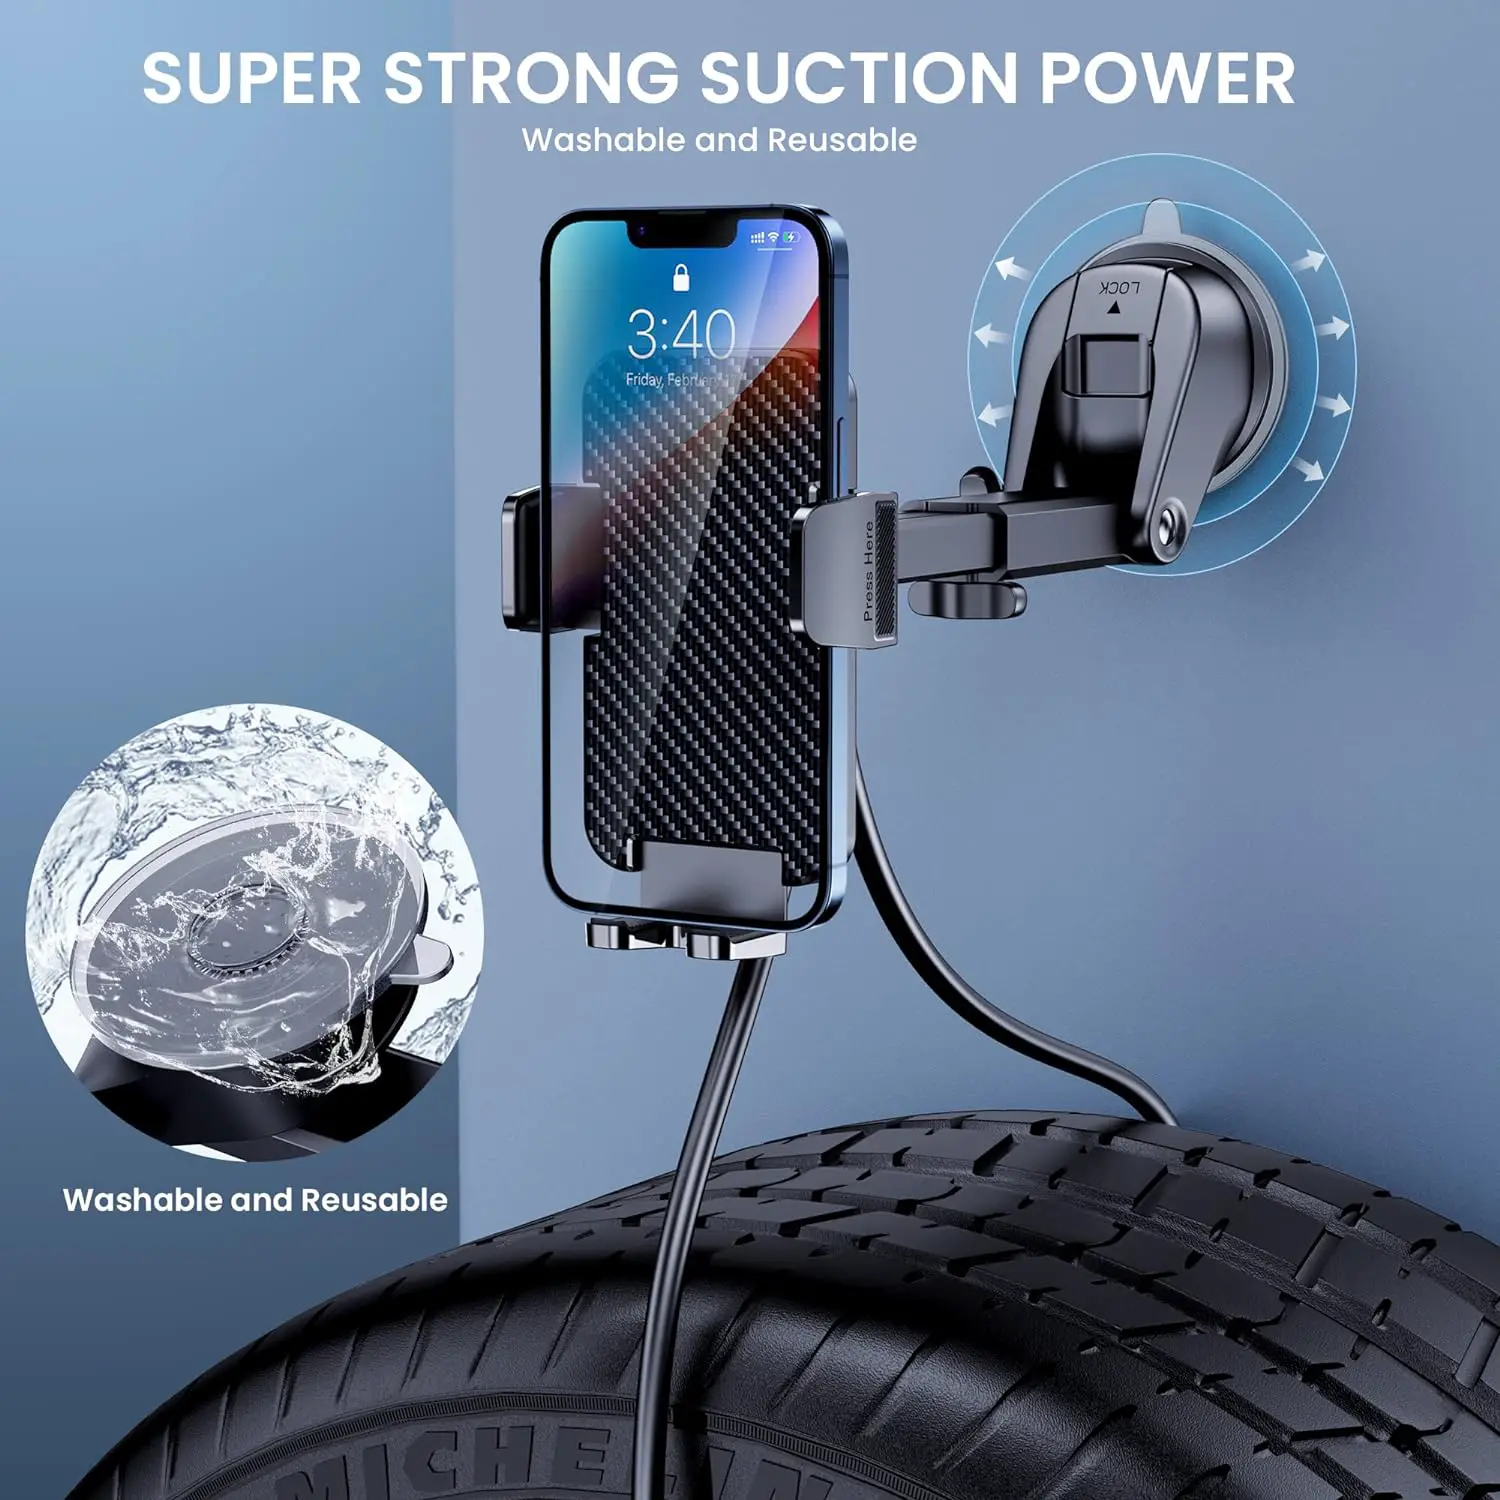 Phone Mount for Car, Phone Holder Mount [Military-Grade Suction] Cell Phone Holder, Universal Phone Stand for Car Dashboard Windshield, Automobile Cradles Fit iPhone Android Smartphone